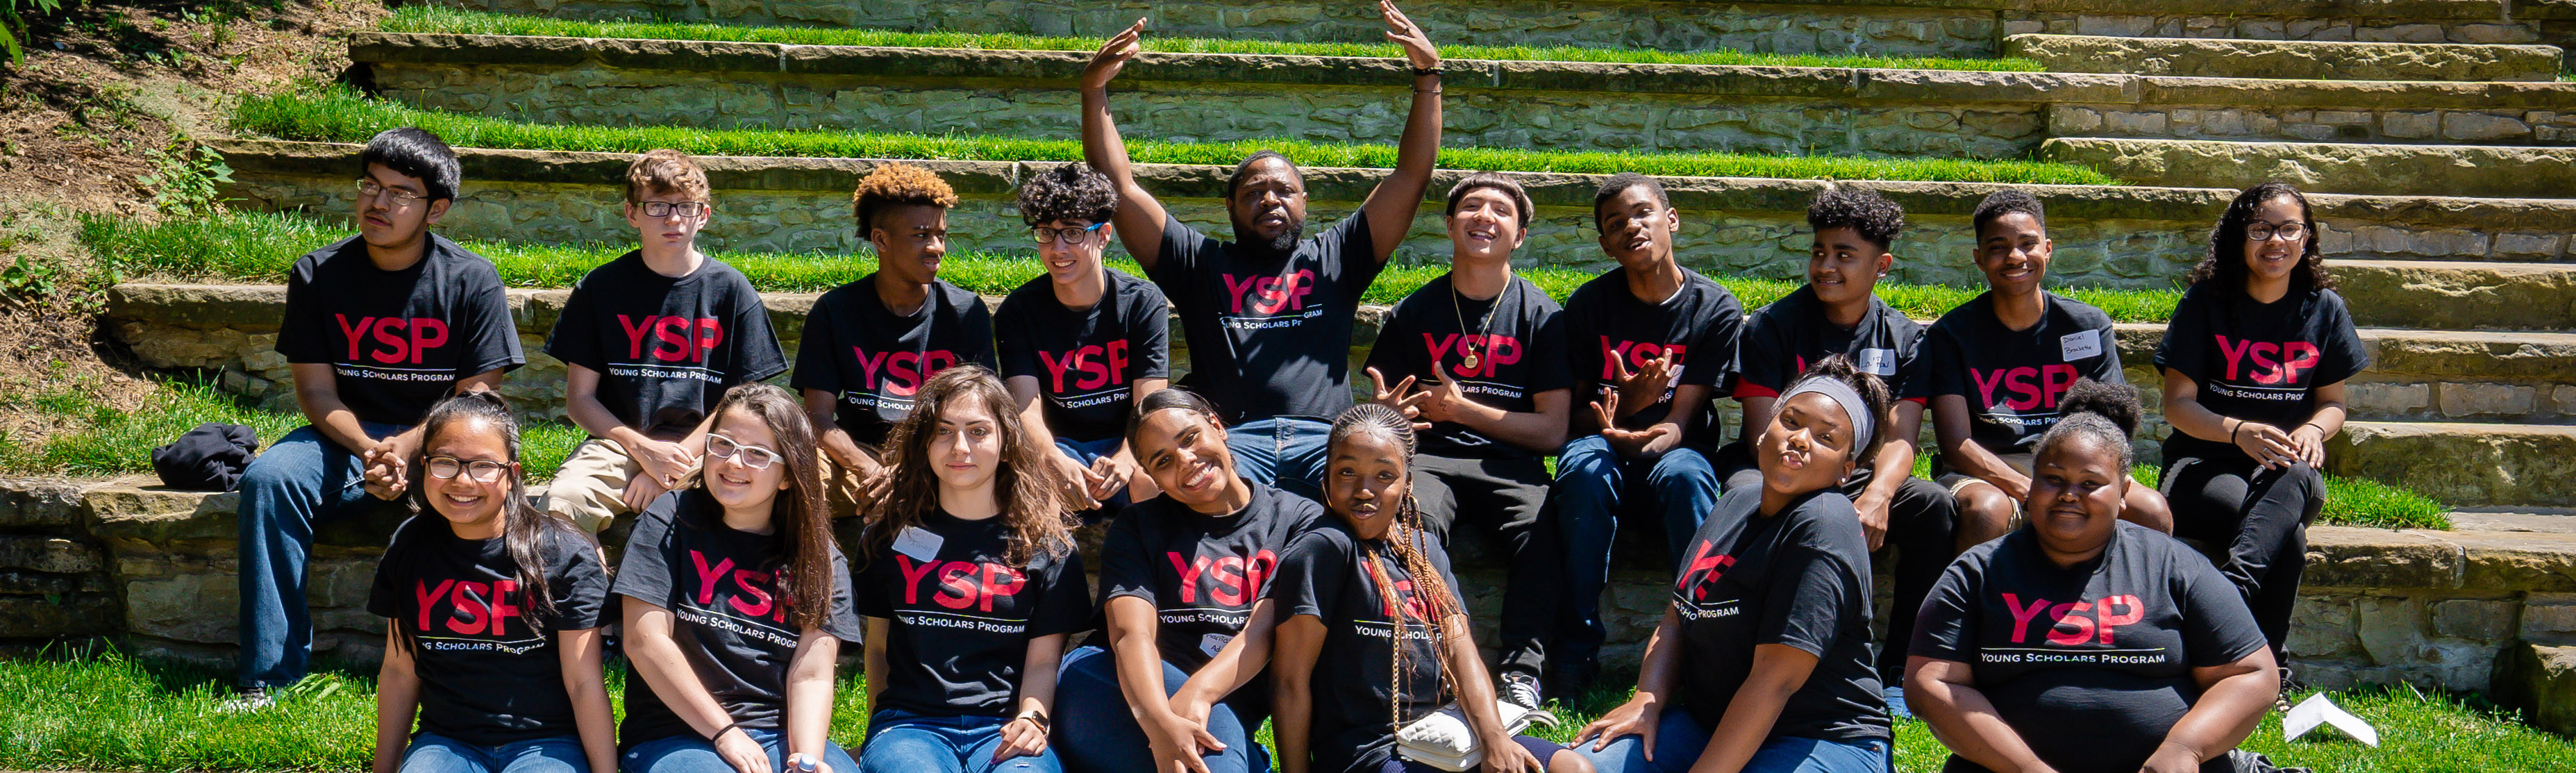 Young Scholars in YSP t-shirts sitting in the Ohio State Ampitheater